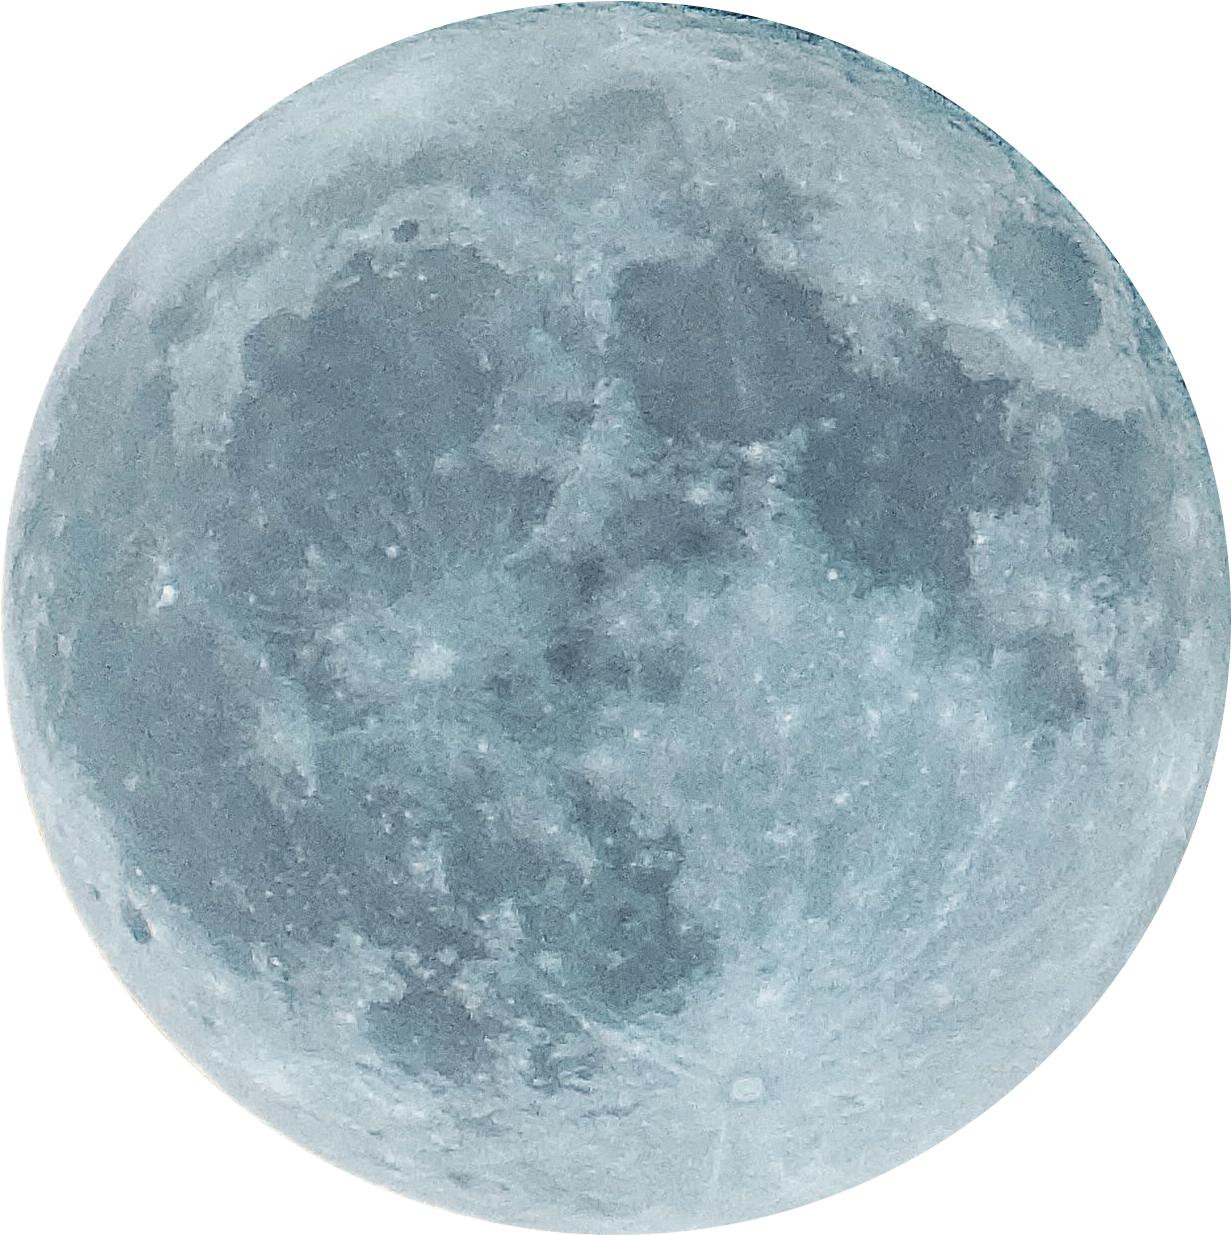 Download Download - Moon Png Hd PNG Image with No Background - PNGkey.com